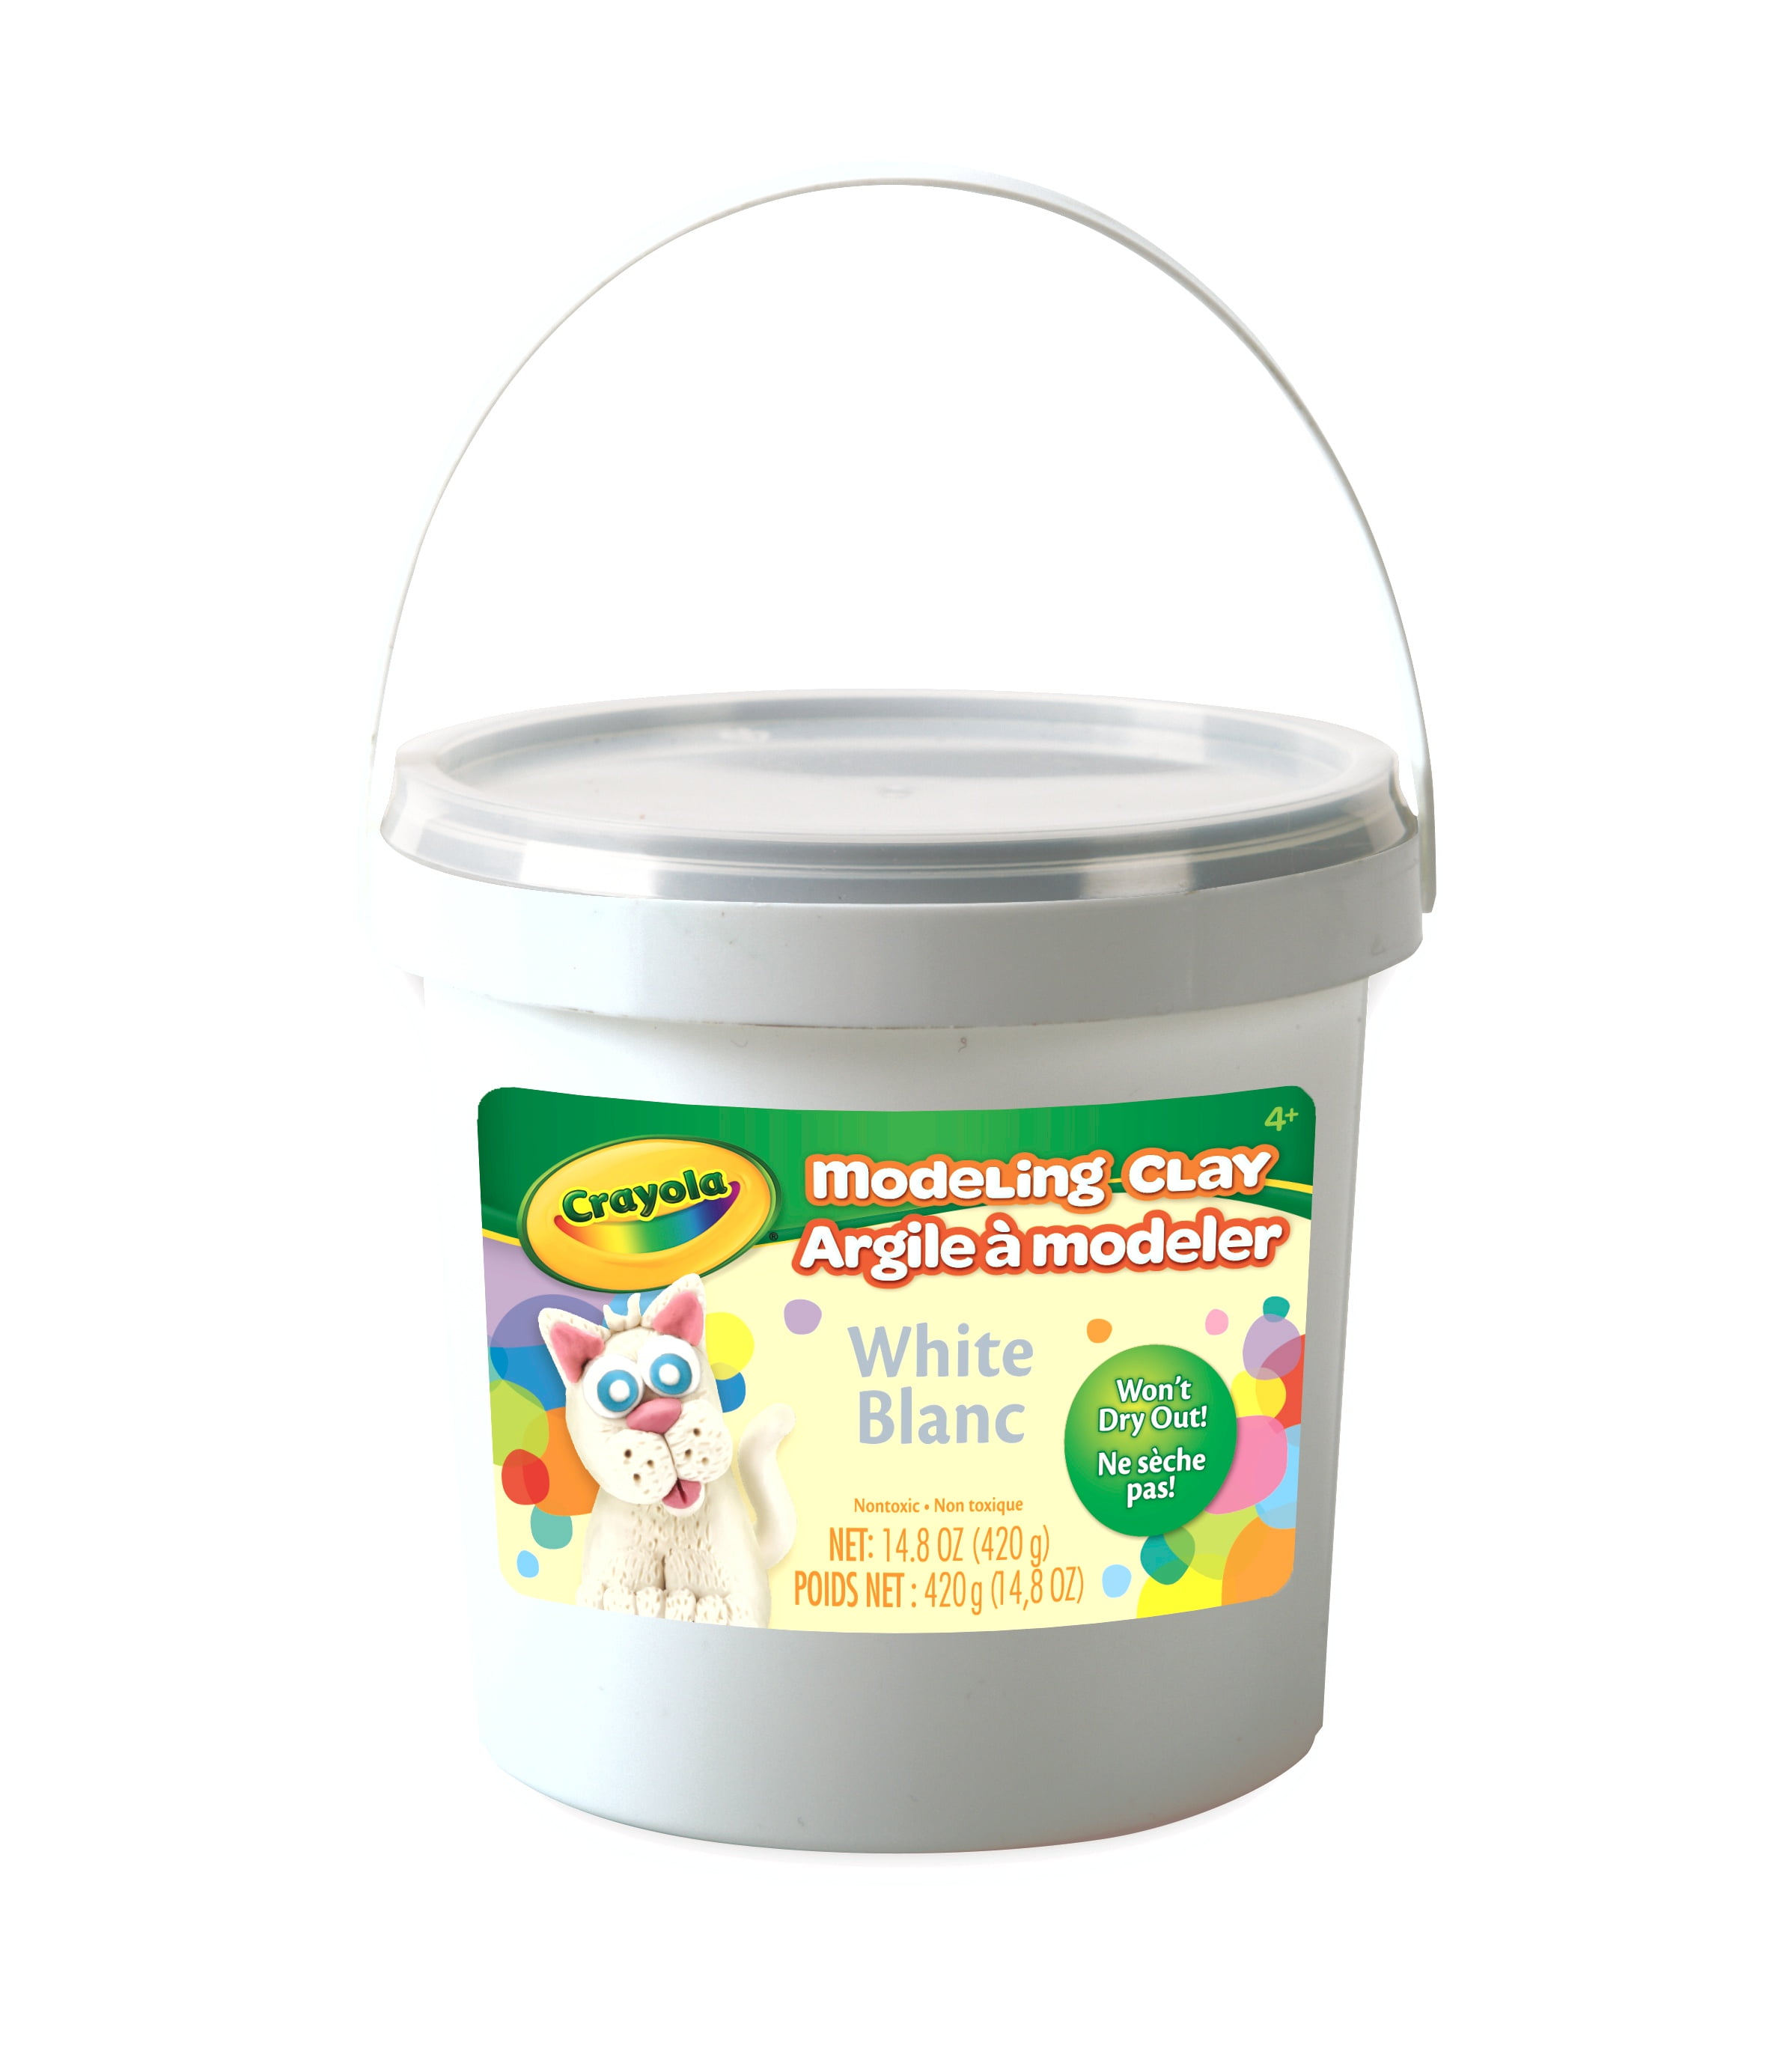 Crayola Modeling Clay Bucket, Modeling Clay For Kids, 15 Oz., White